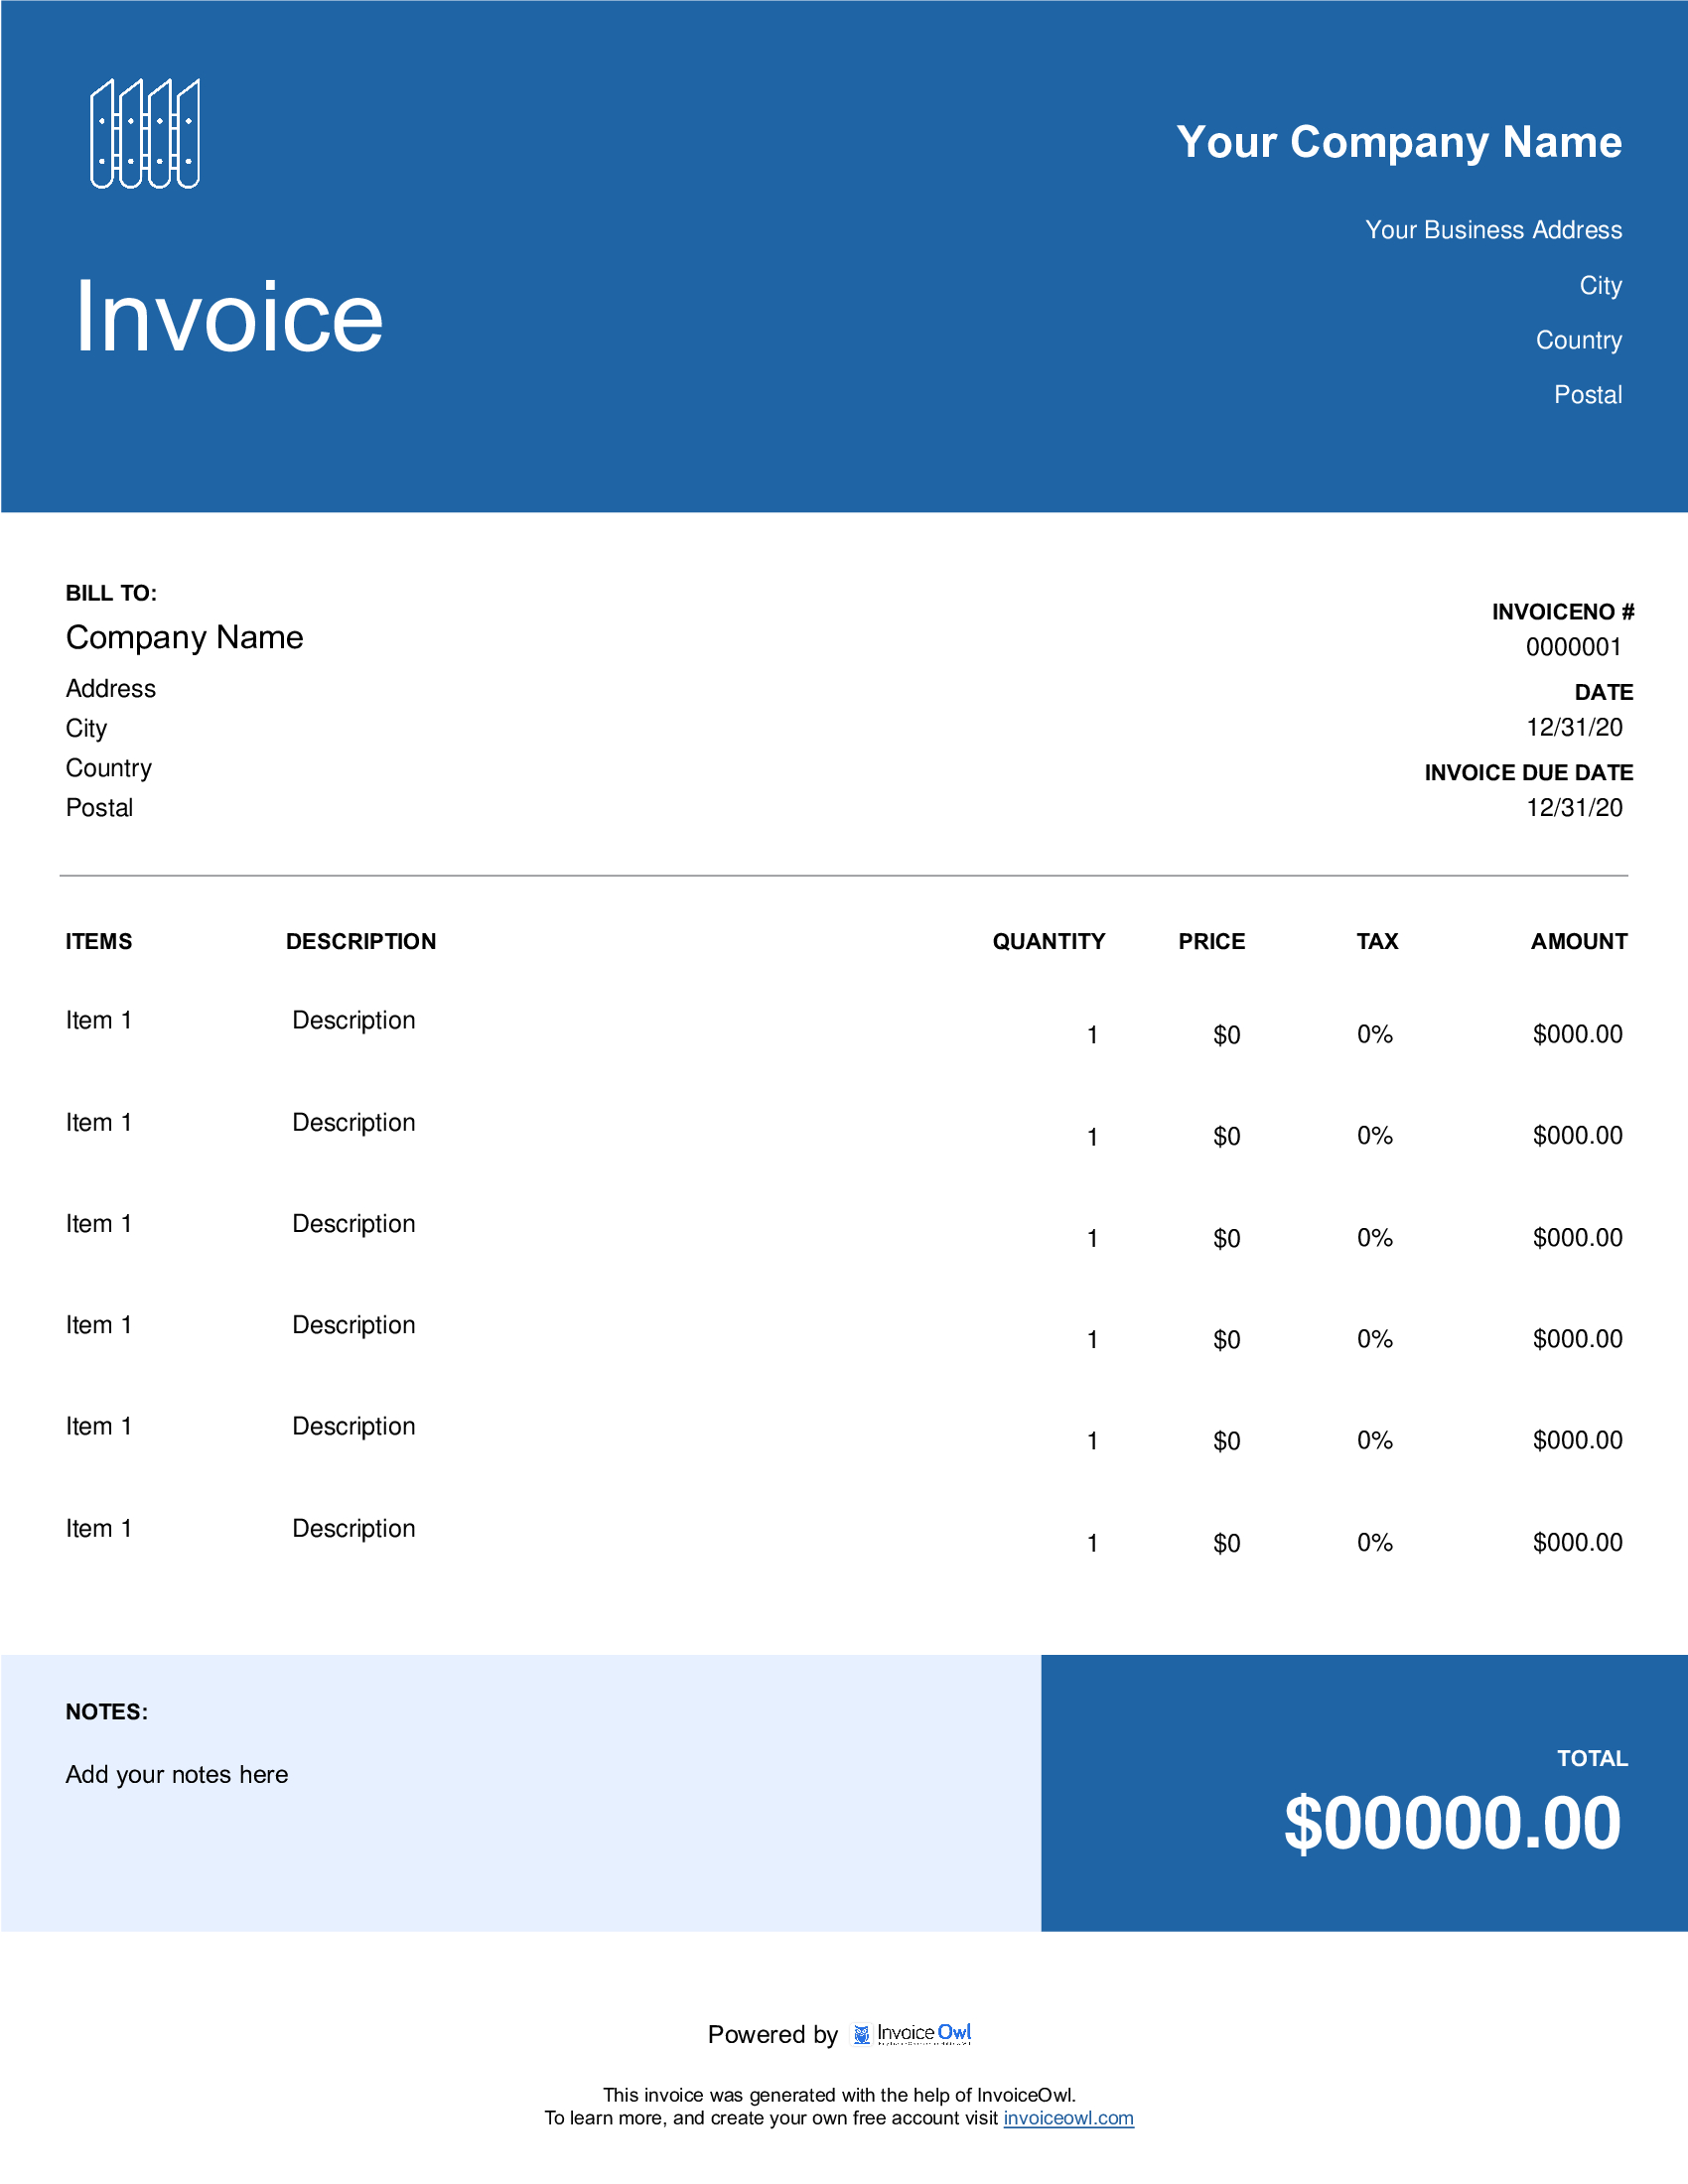 wood fencing business invoice template